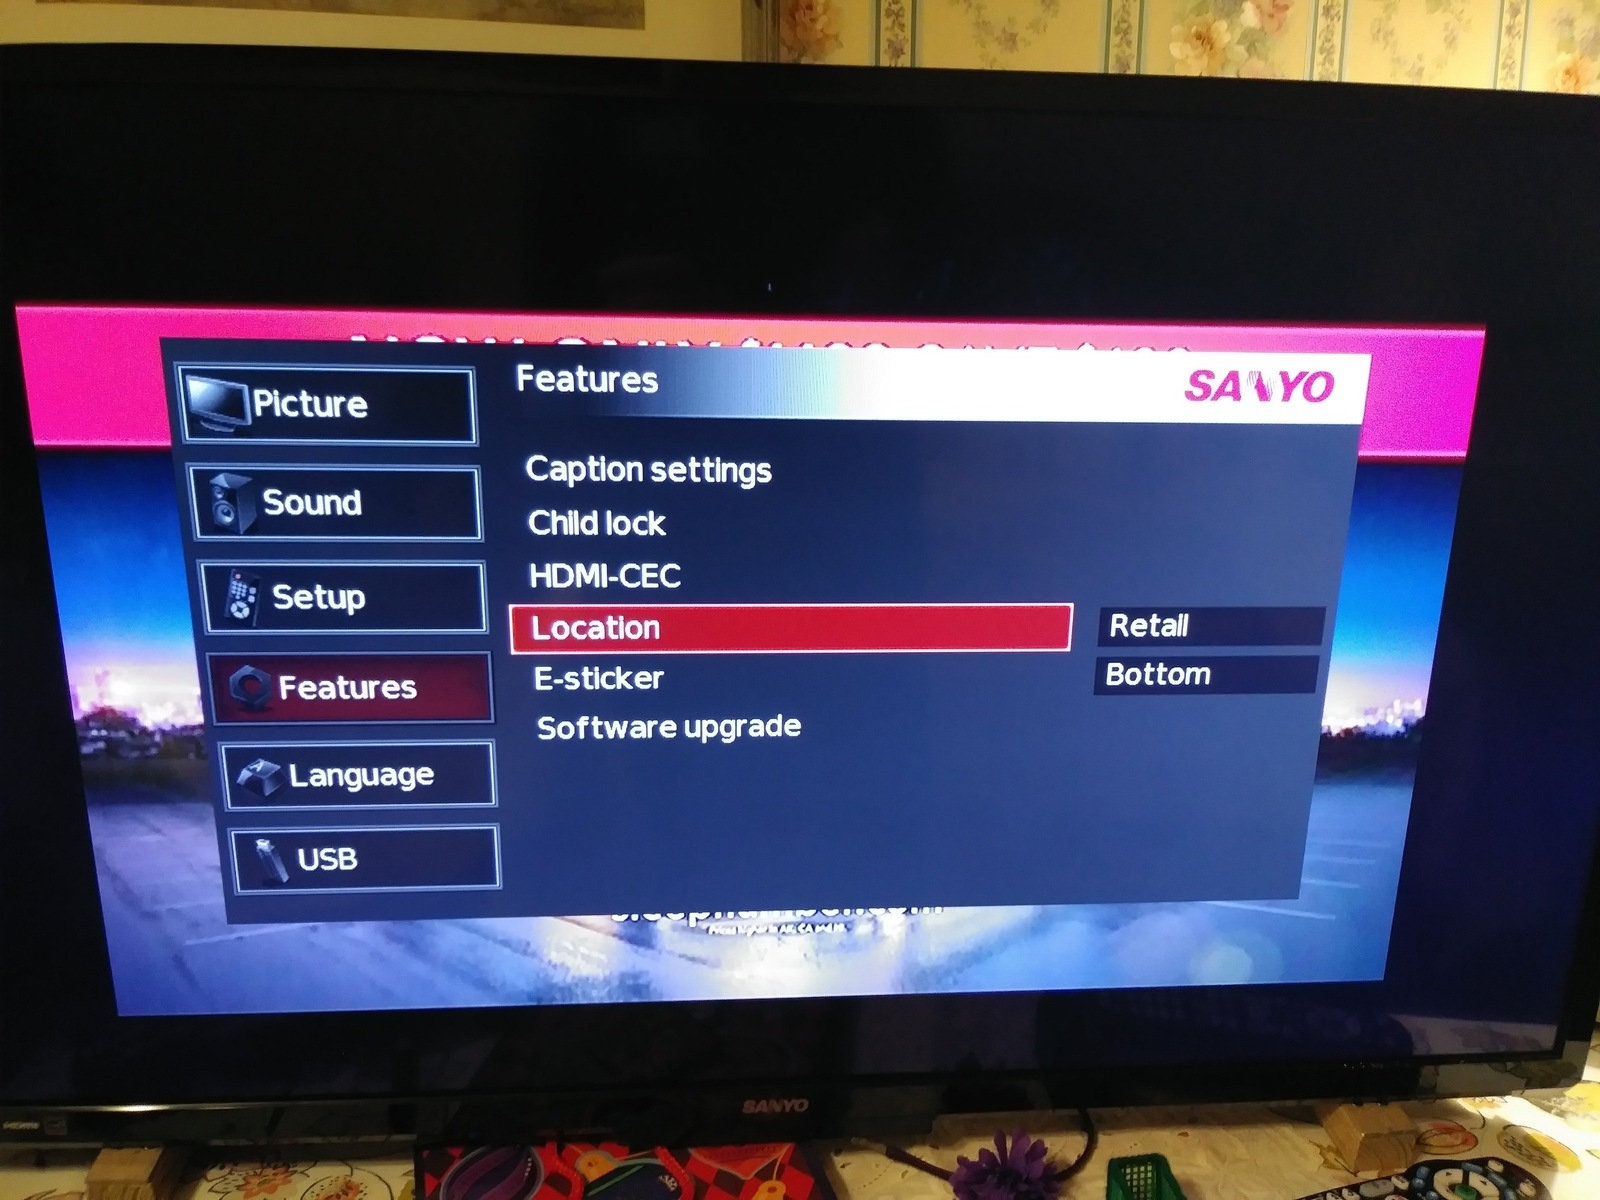 How To Change HDMI Settings On Sanyo Tv